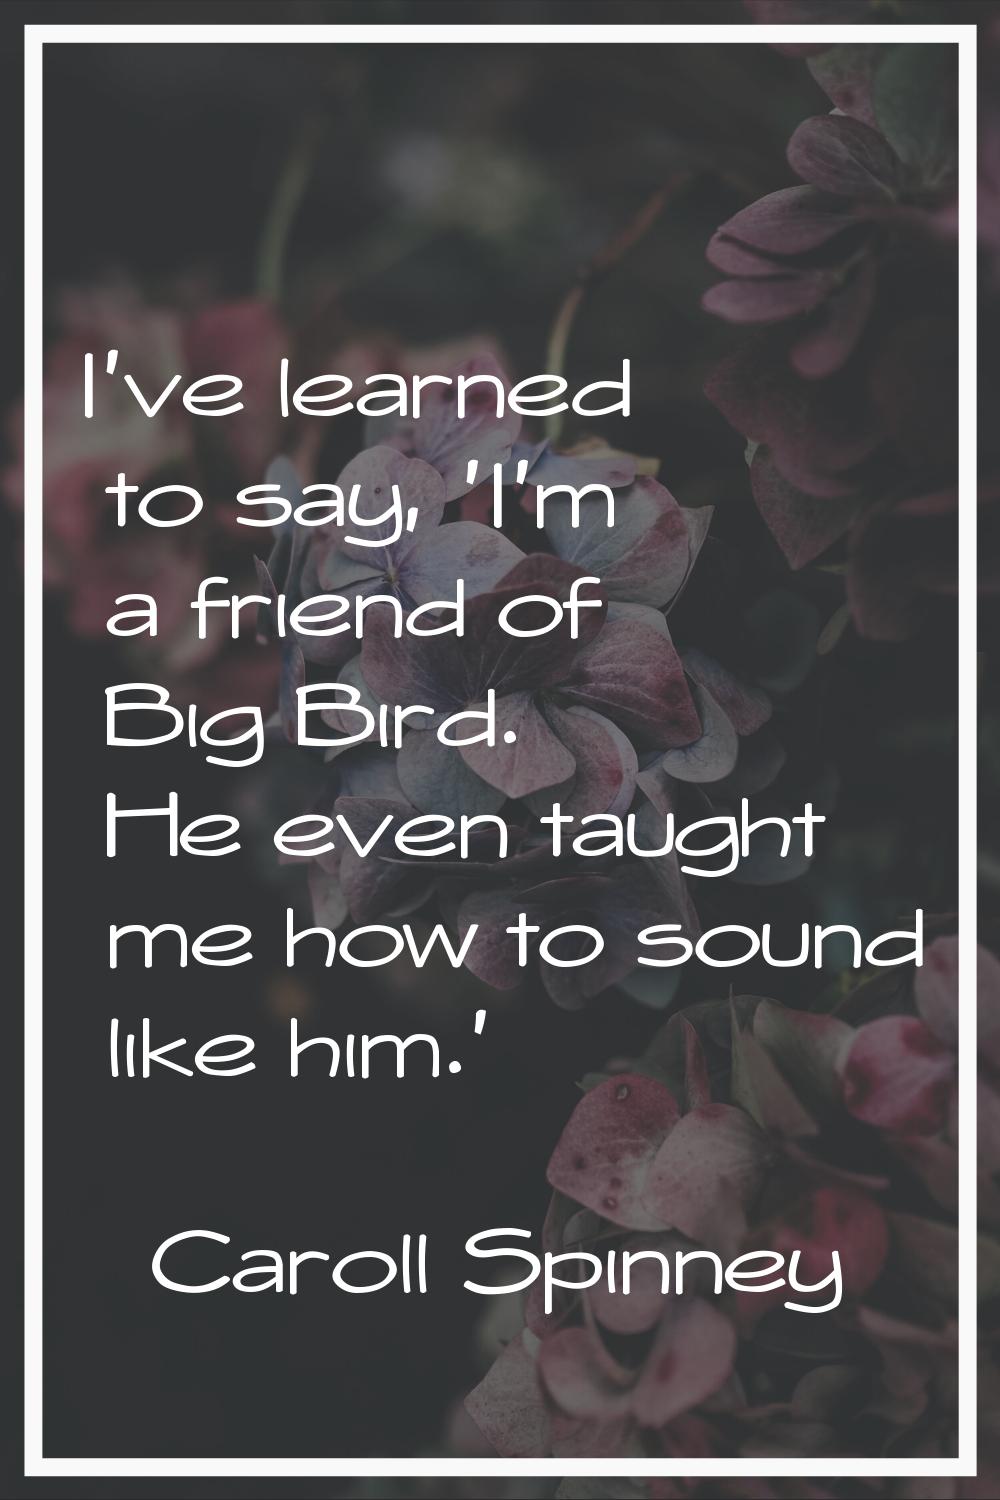 I've learned to say, 'I'm a friend of Big Bird. He even taught me how to sound like him.'